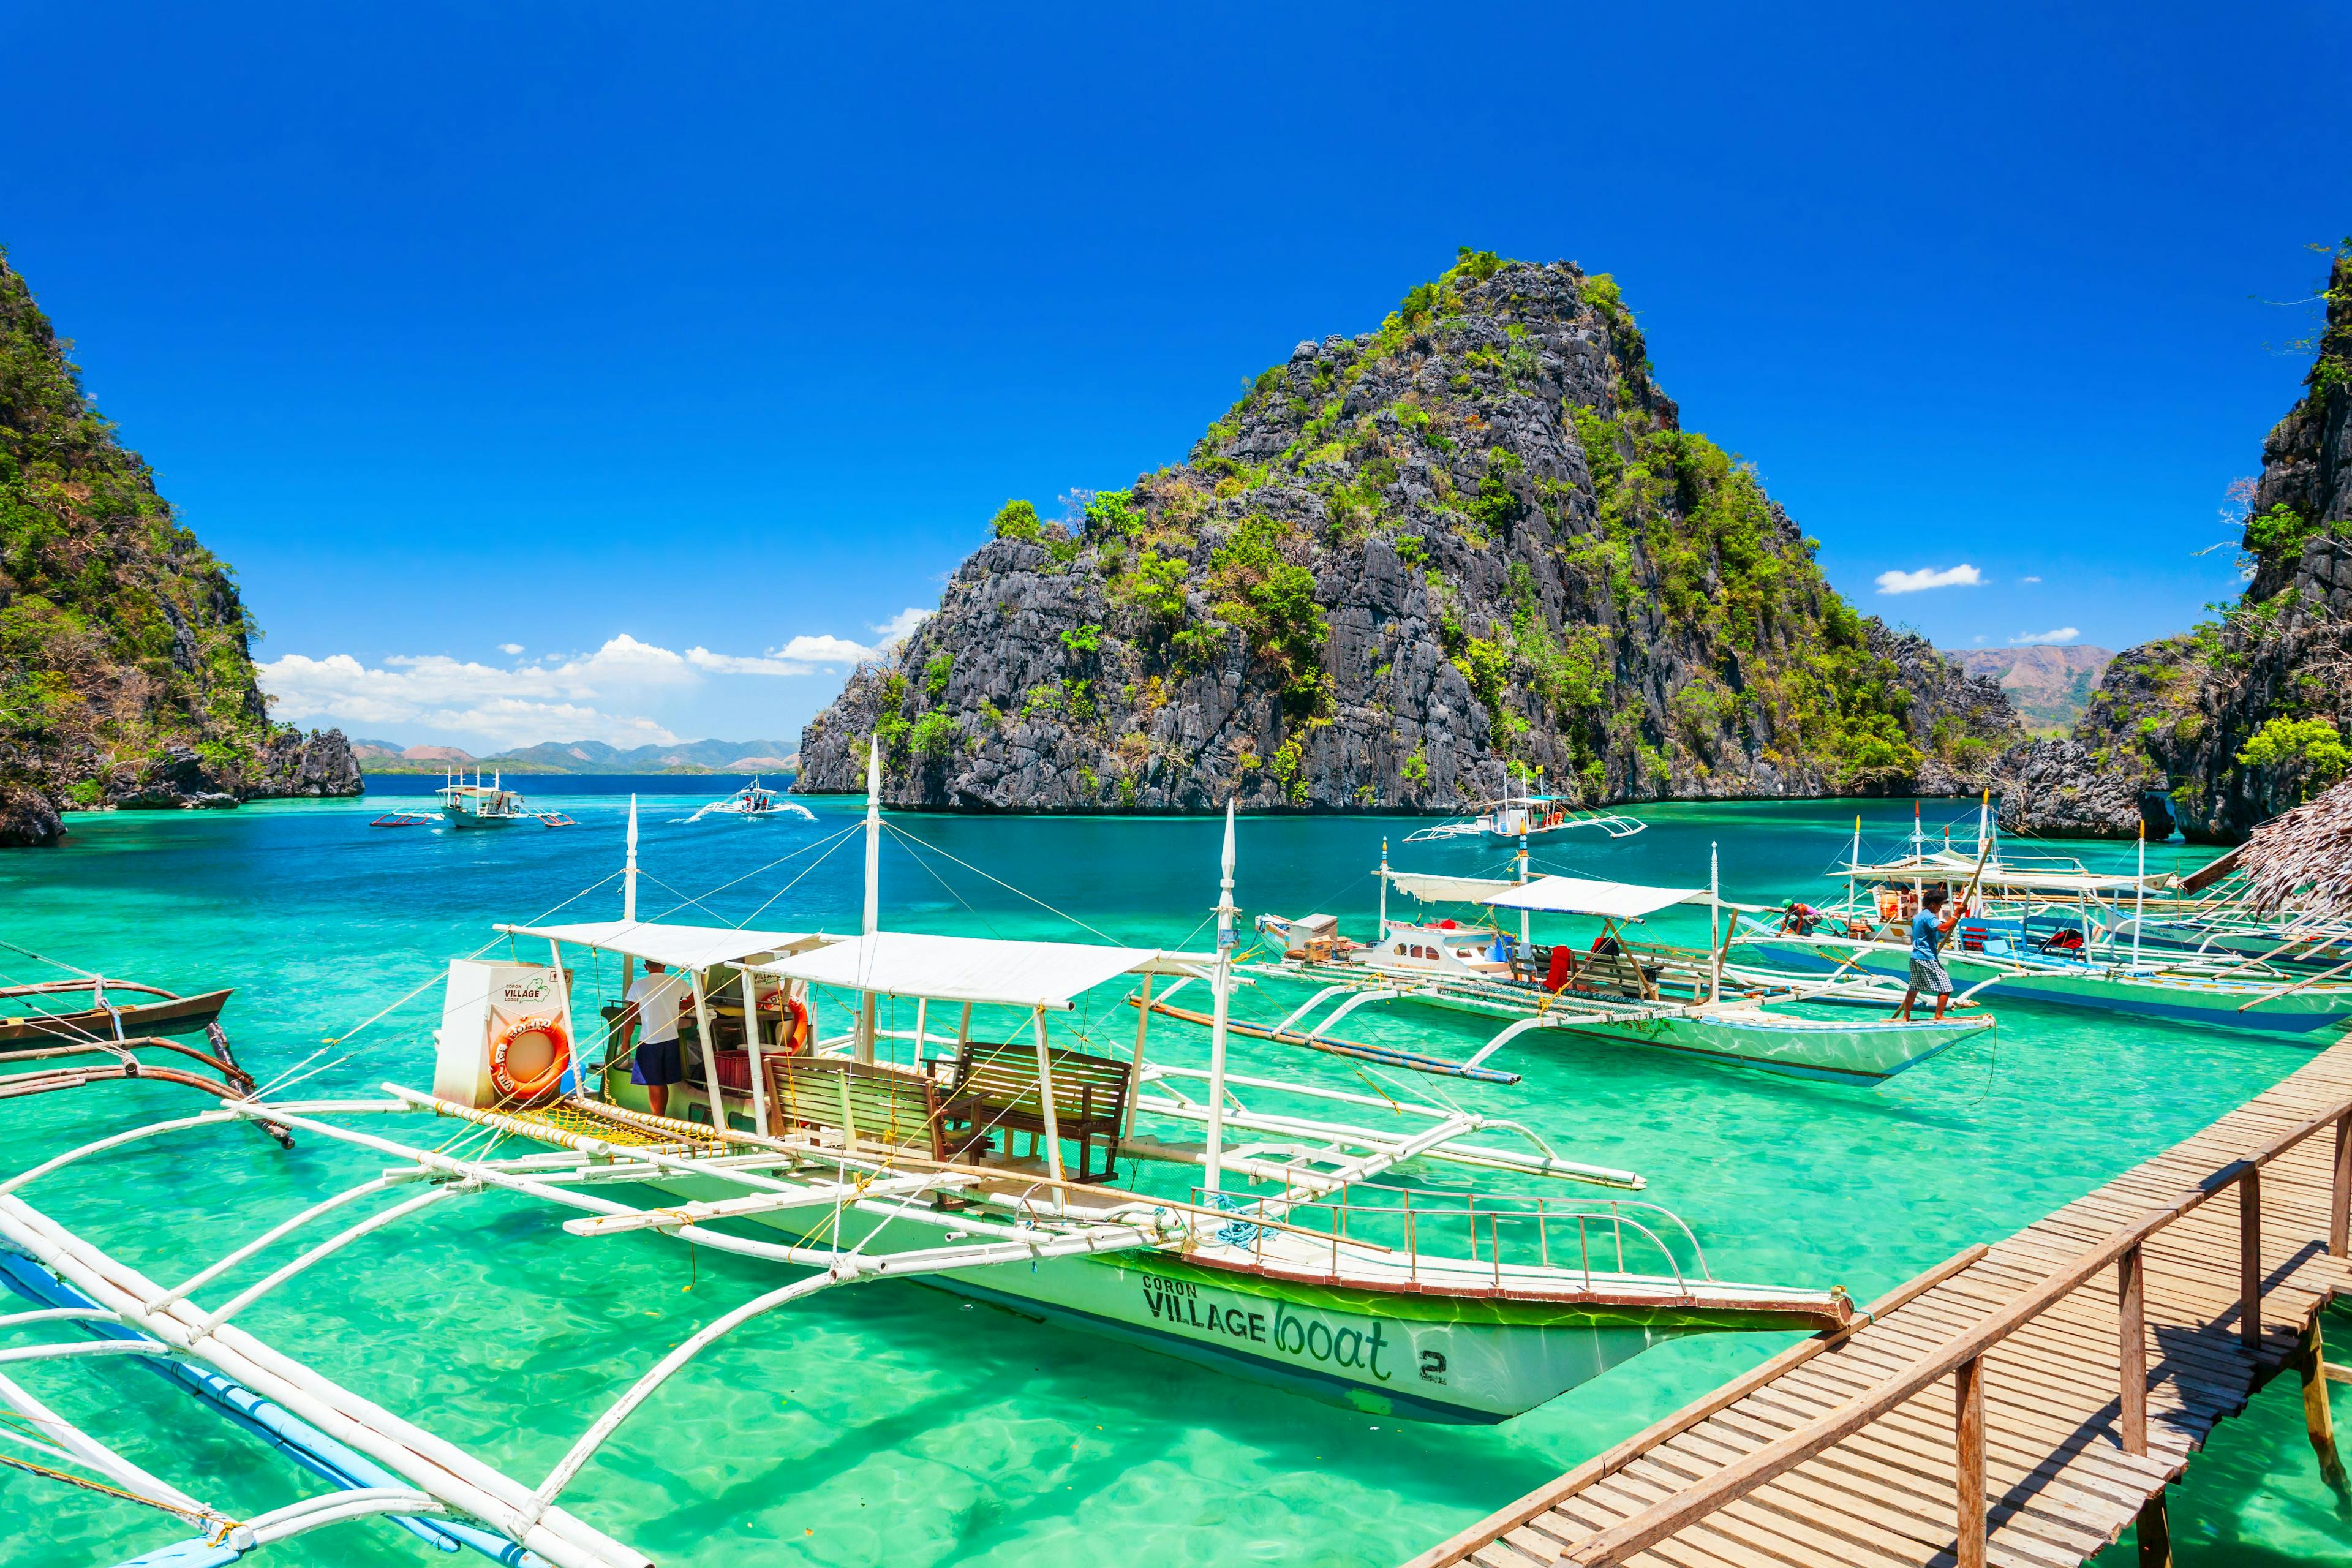  the clearest waters in the world - Palawan, Philippines - ratepunk